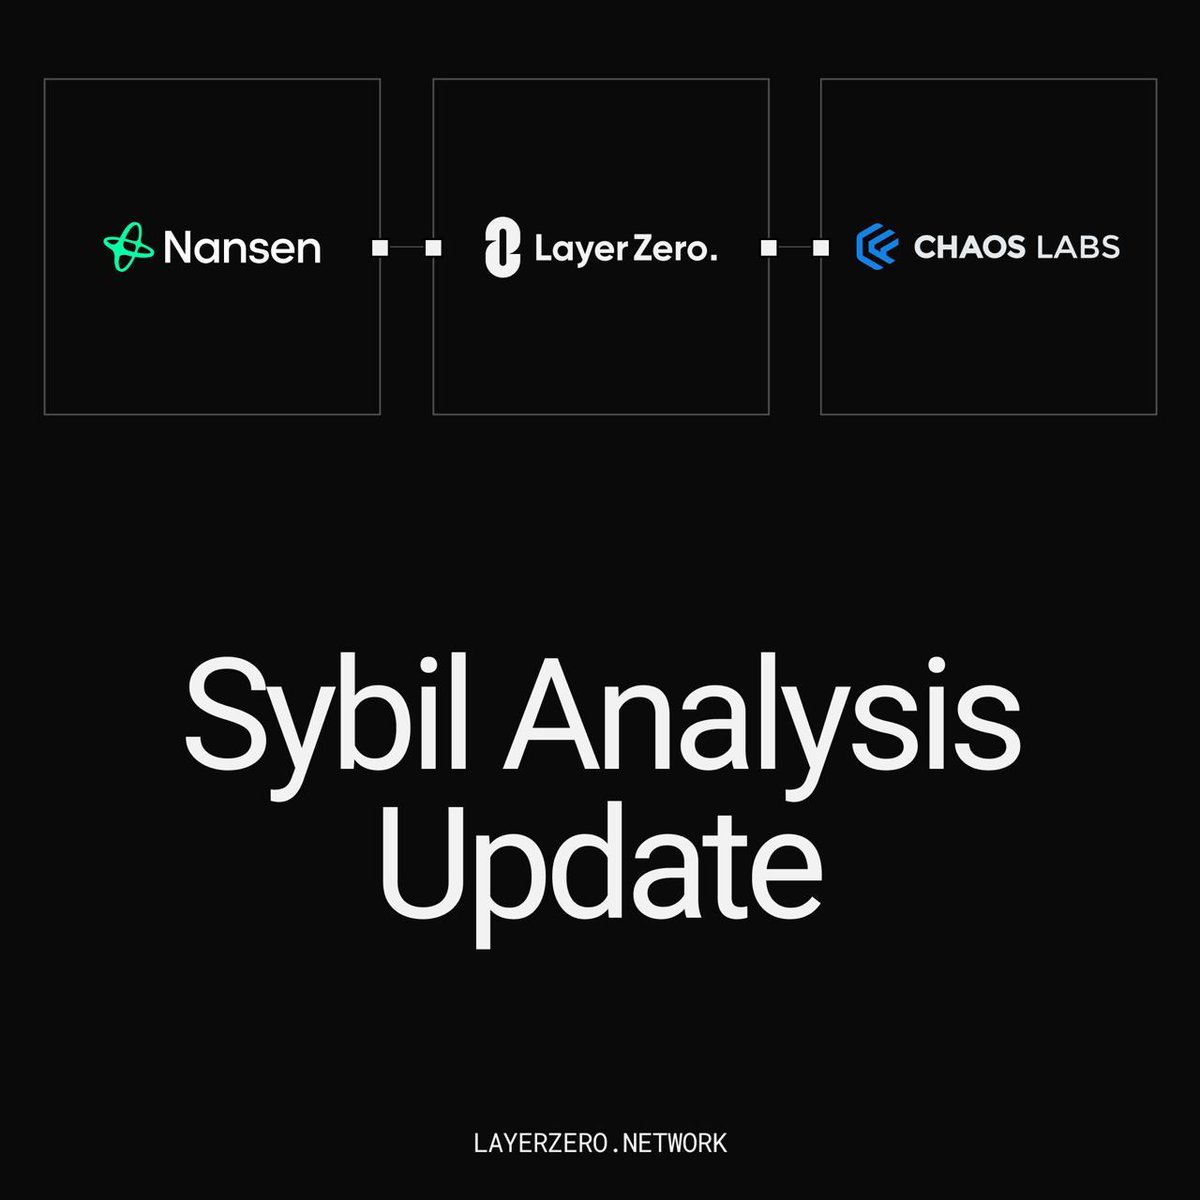 Sybil Report LayerZero has been working with industry-leading partners @chaos_labs and @nansen_ai to conduct our sybil detection report. This analysis will consider every user’s total transactions weighted across all LayerZero applications with the goal of aligning TGE with